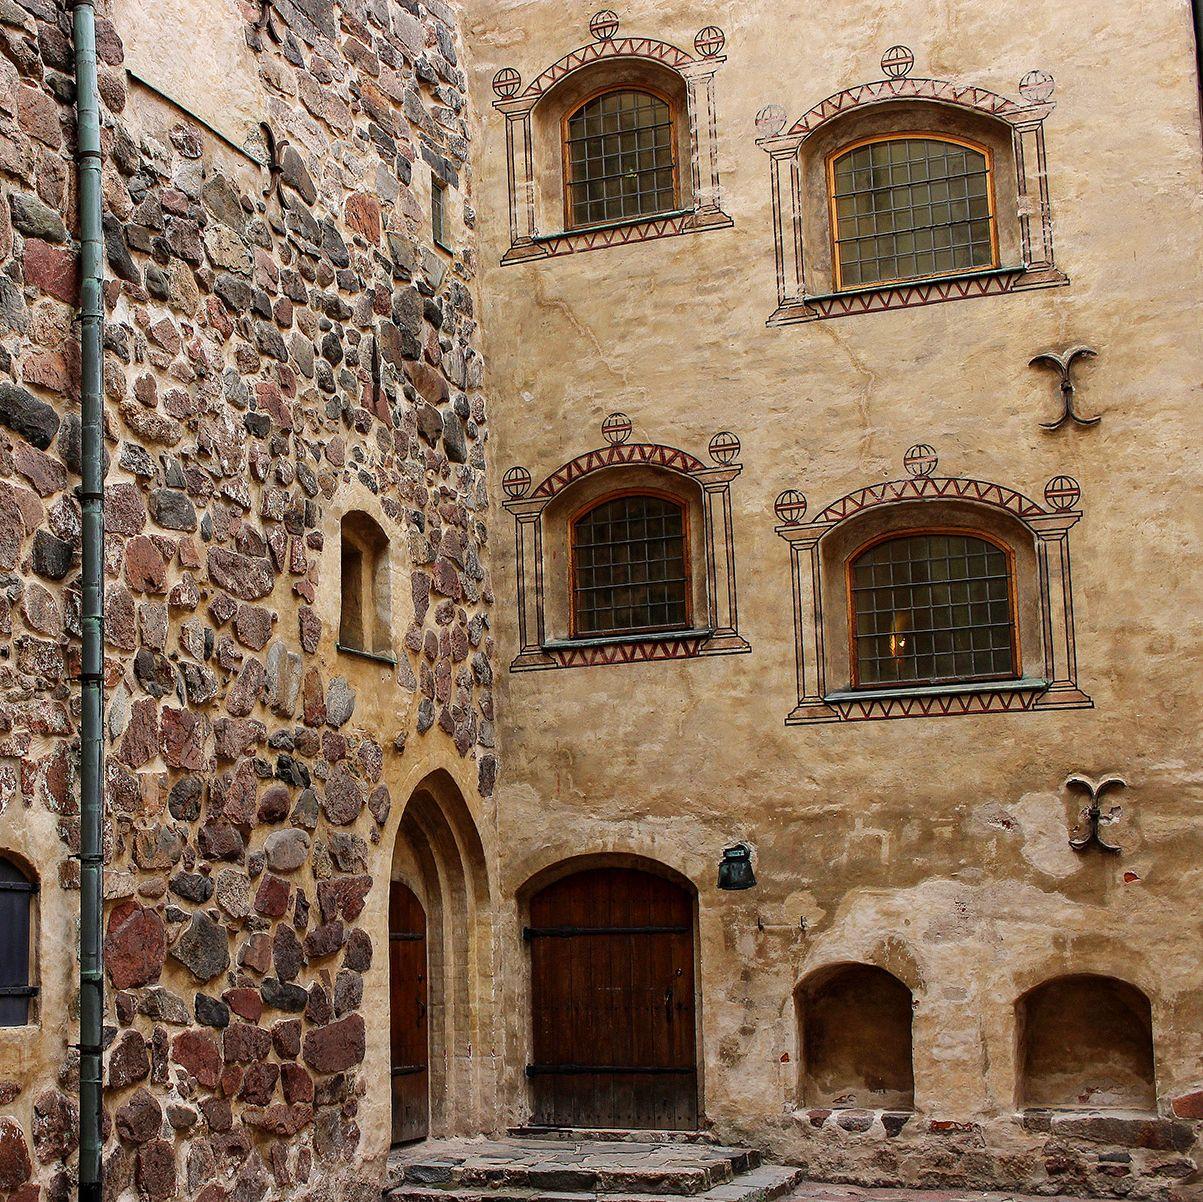 The courtyard at Turku Castle, featuring stone walls and decorative arched windows.